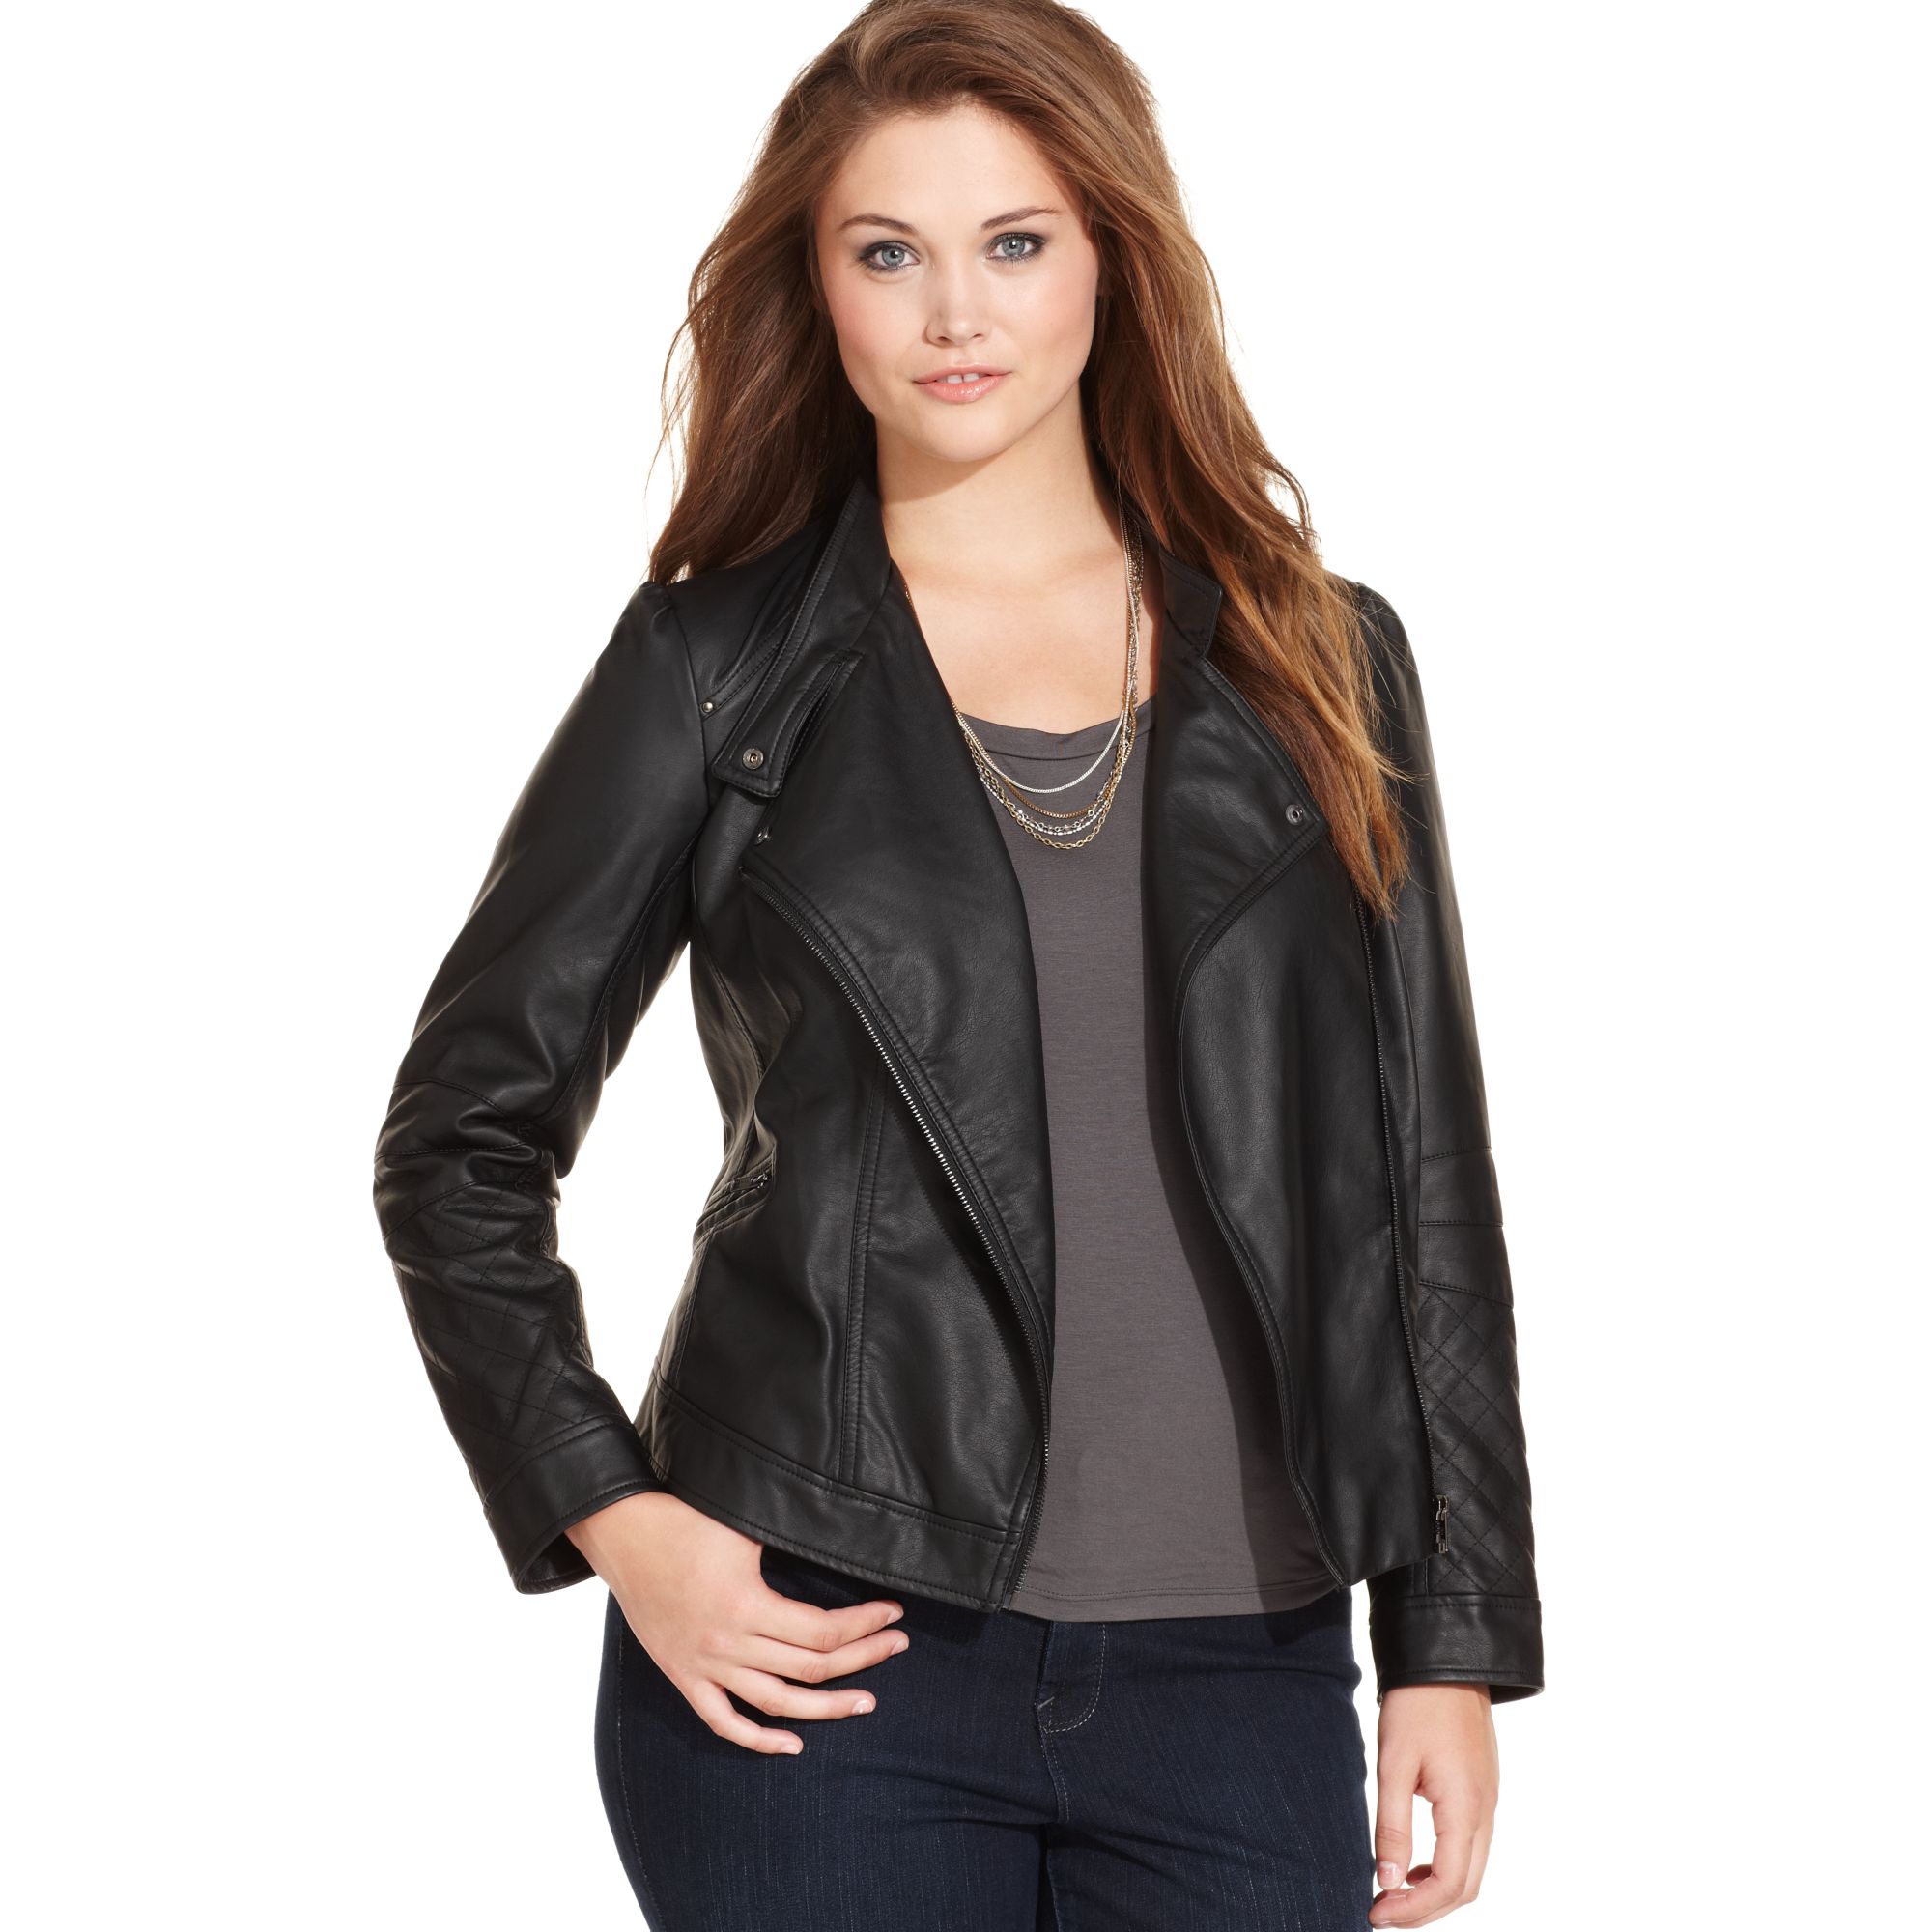 Lyst - Jessica simpson Faux Leather Moto Jacket in Black2000 x 2000